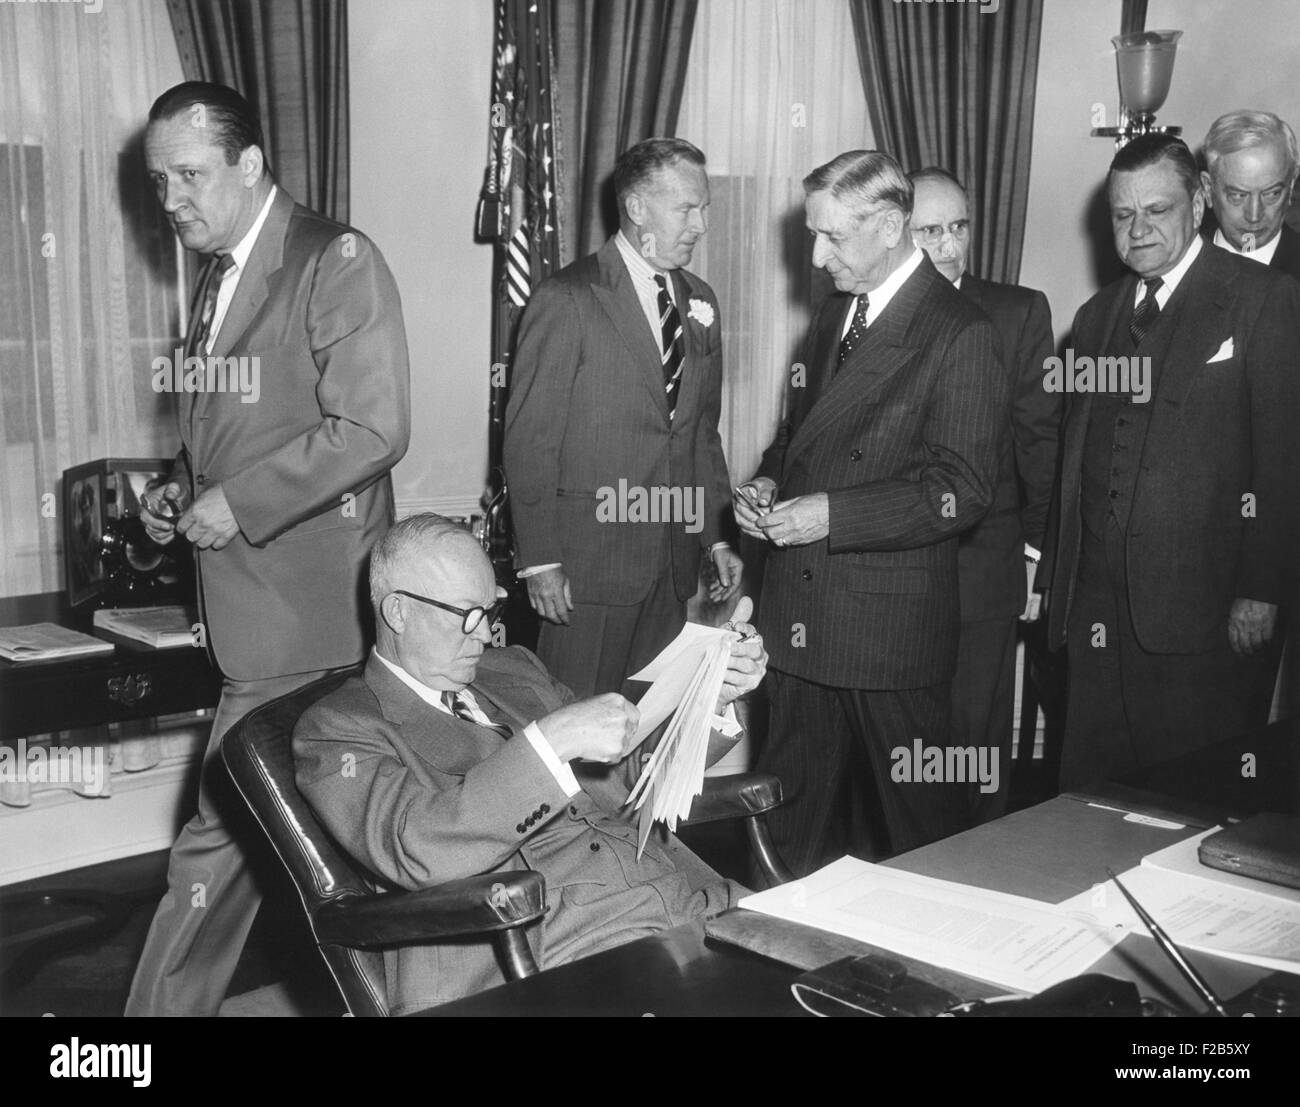 President Eisenhower reads the Highway Act of 1954 before signing. May 6, 1954. Eisenhower saw the German advantage that resulted from the autobahn highway network during World War 2. Standing, L-R: Sen. William F. Knowland; Gen. Wilton Persons; Rep. George Dondero; Rep. Clifford Davis; Sen. Francis Case; Sen. Edward Martin. - (BSLOC 2014 16 230) Stock Photo